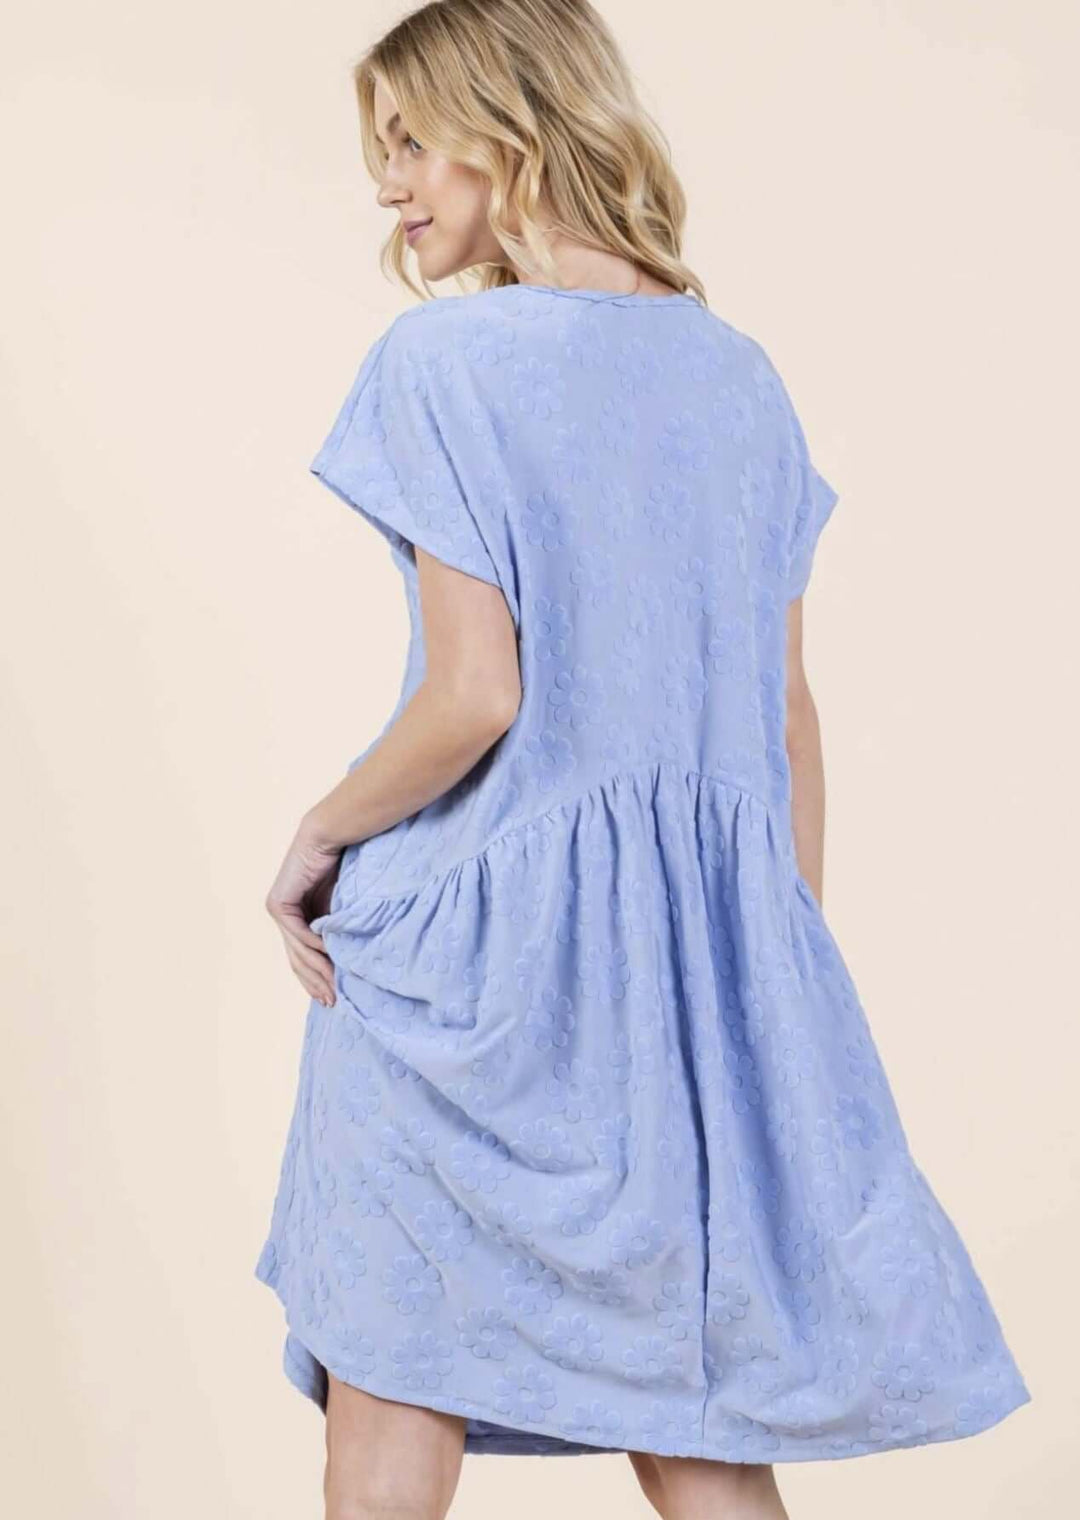 Made in USA Soft Textured Daisy Detail Dress, Above the Knee Length, Short Sleeves, Round Neckline, Soft Stretchy Material, Blue with Raised Daisy Texture Detail